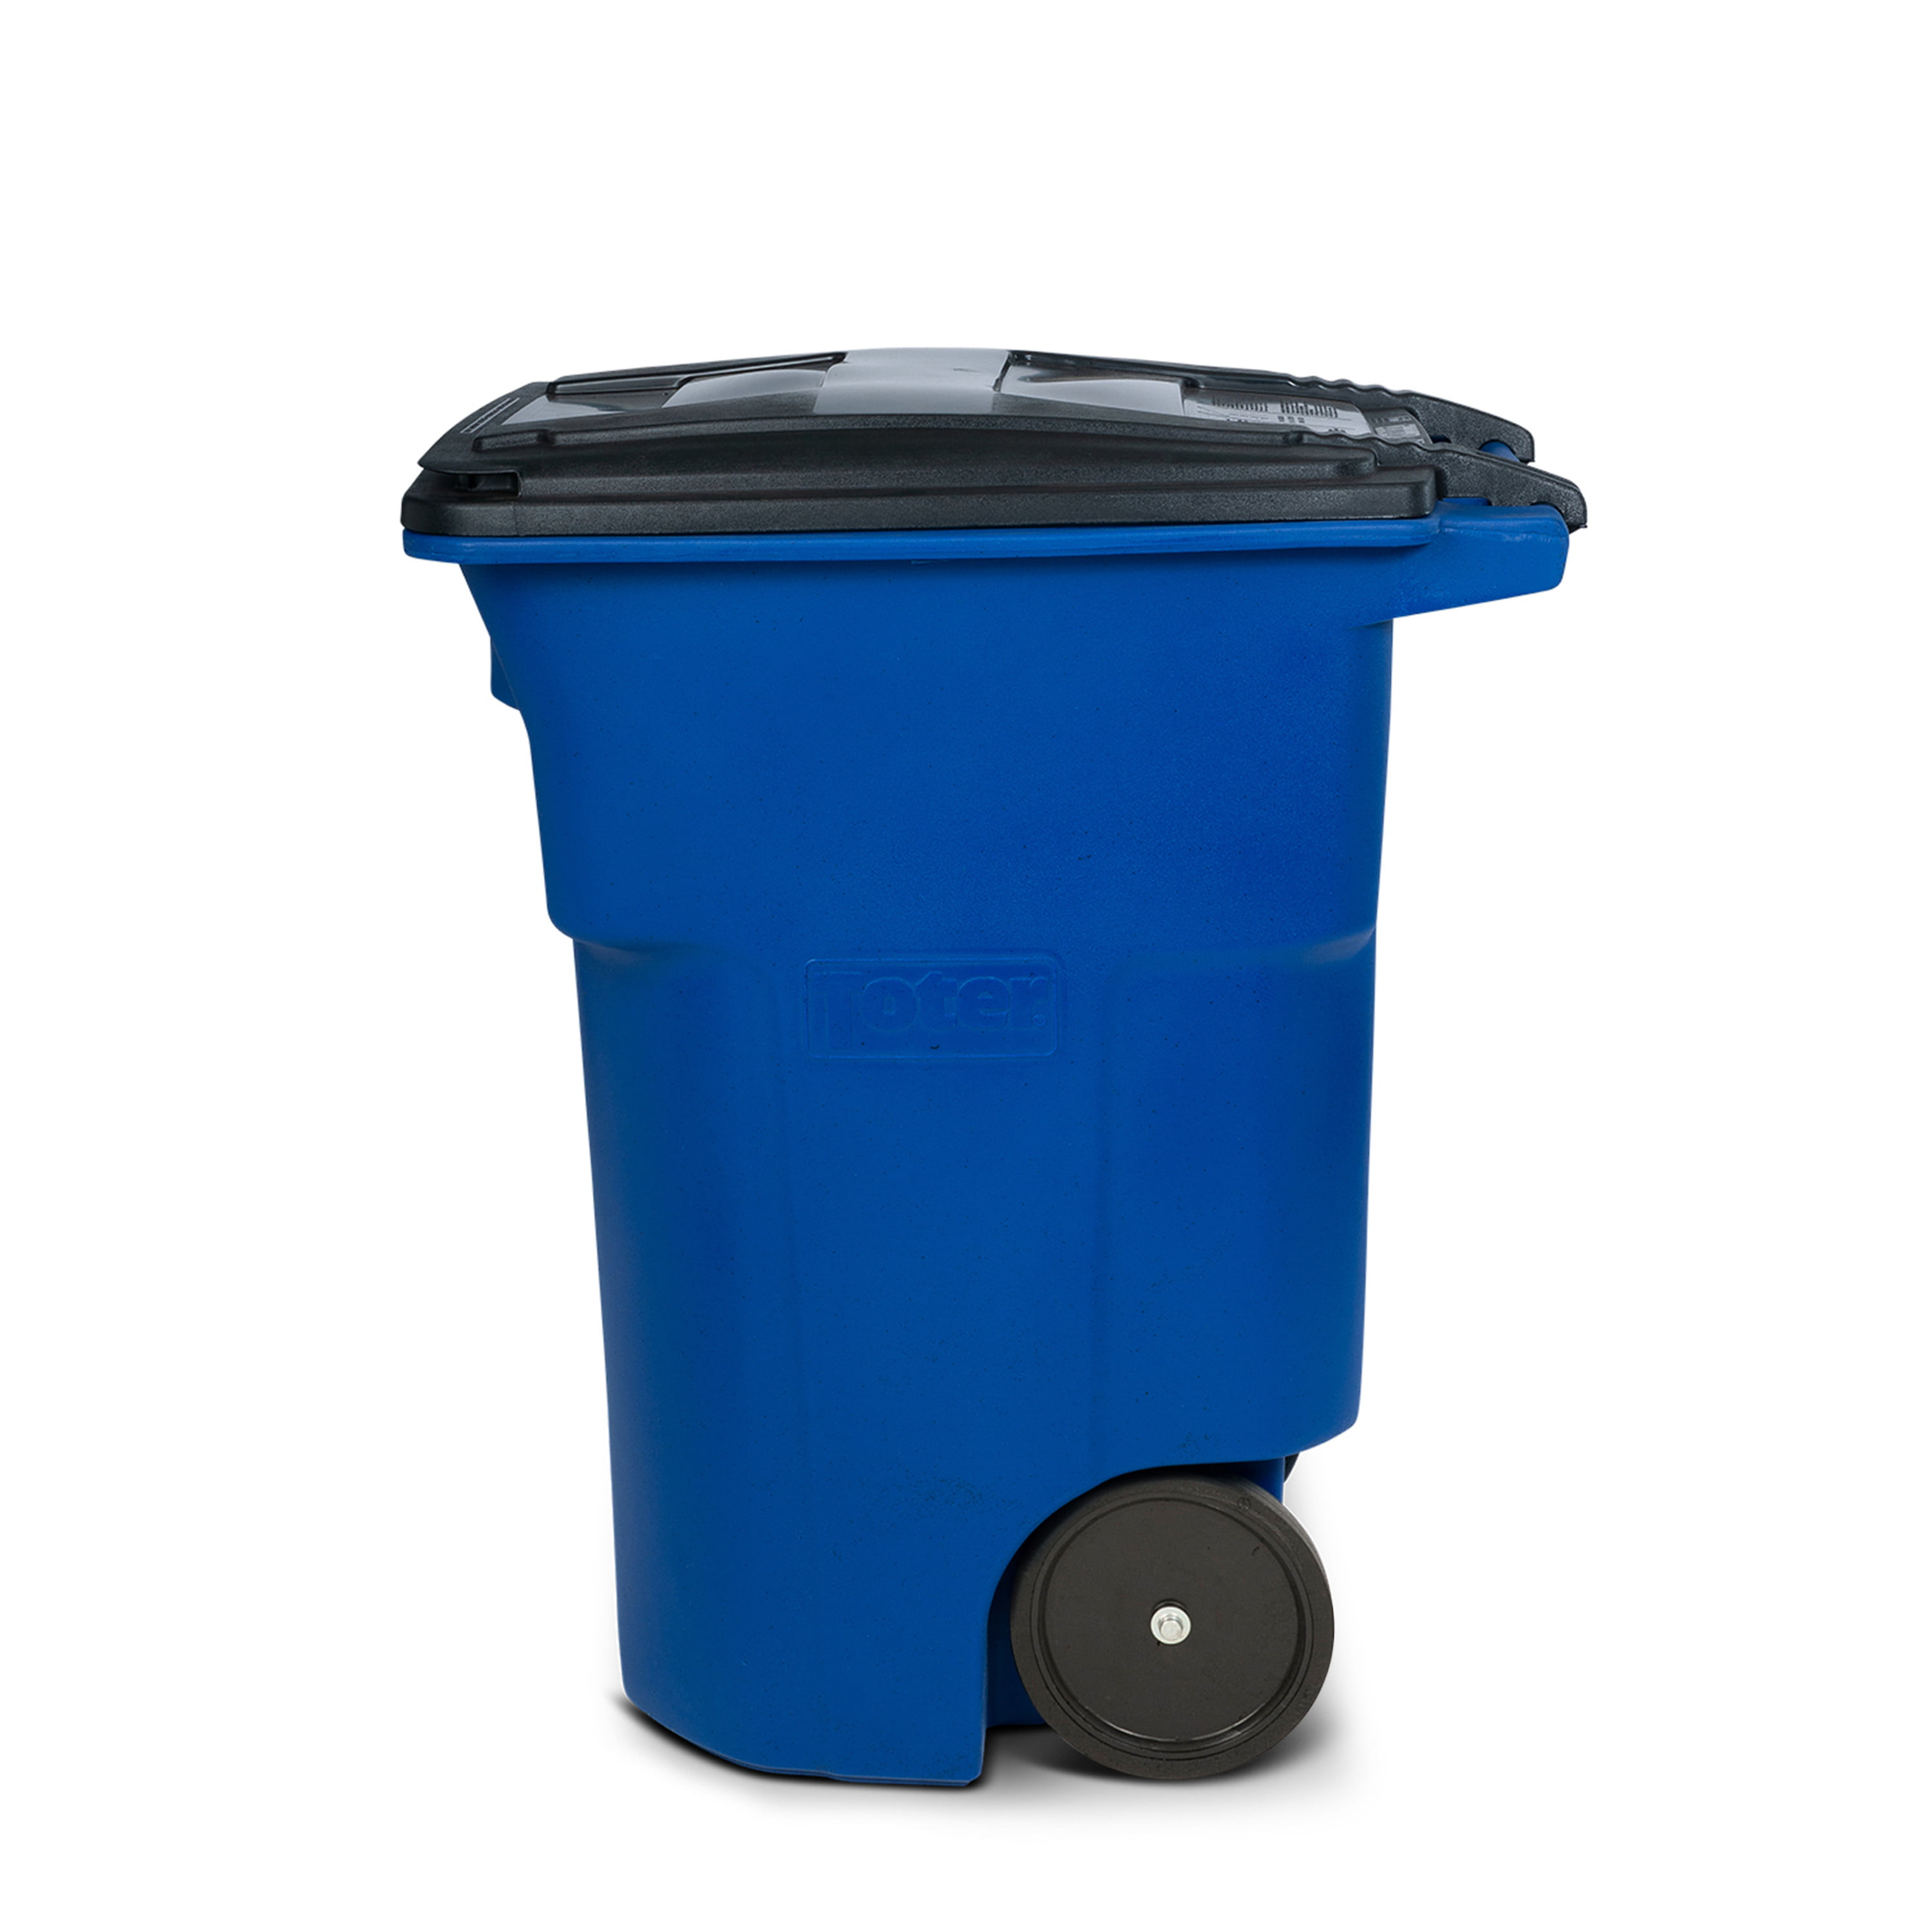 Toter Trash Can Blue With Quiet Wheels And Lid, 96 Gallon